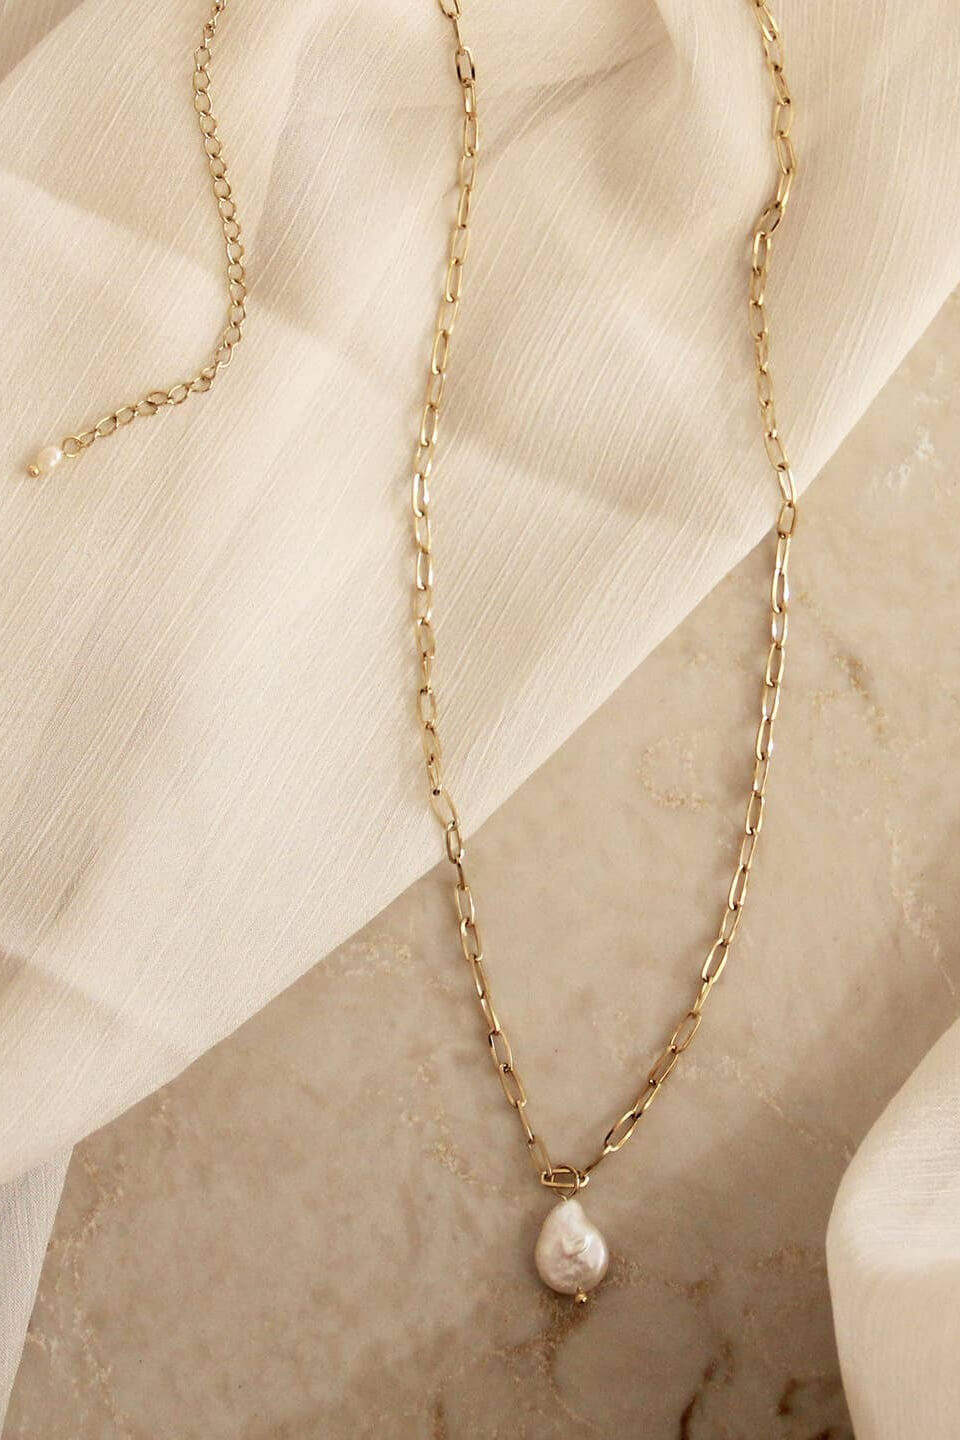 Maive Jewlery baroque pearl paperclip necklace